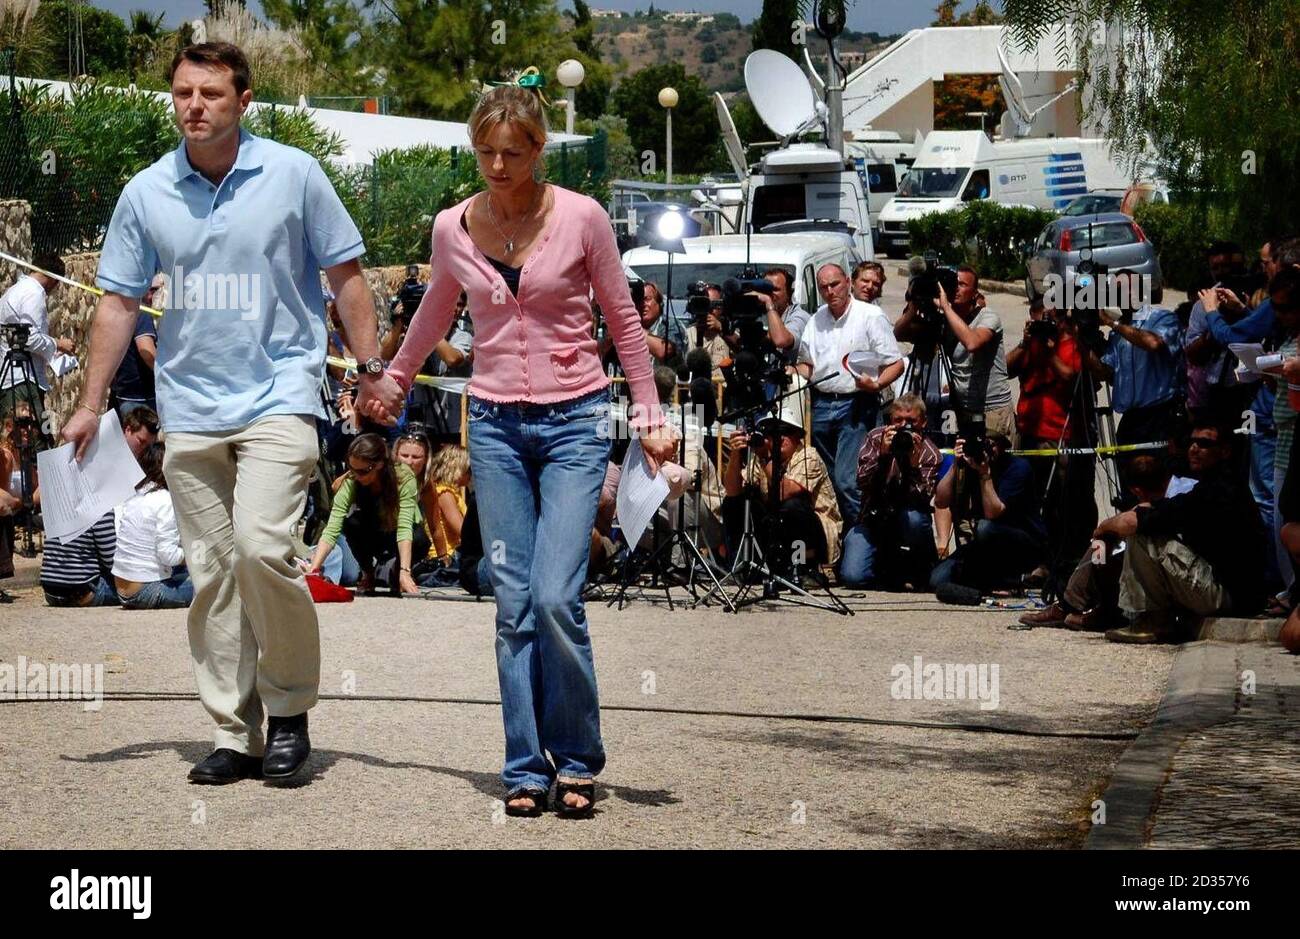 RE-CROP. Gerry McCann, father of missing girl Madeleine McCann after speaking to the press with his wife Kate in Portugal. ... Girl missing in Algarve ... 22-05-2007 ... Praia Da Luz ... Portugal ... Stock Photo